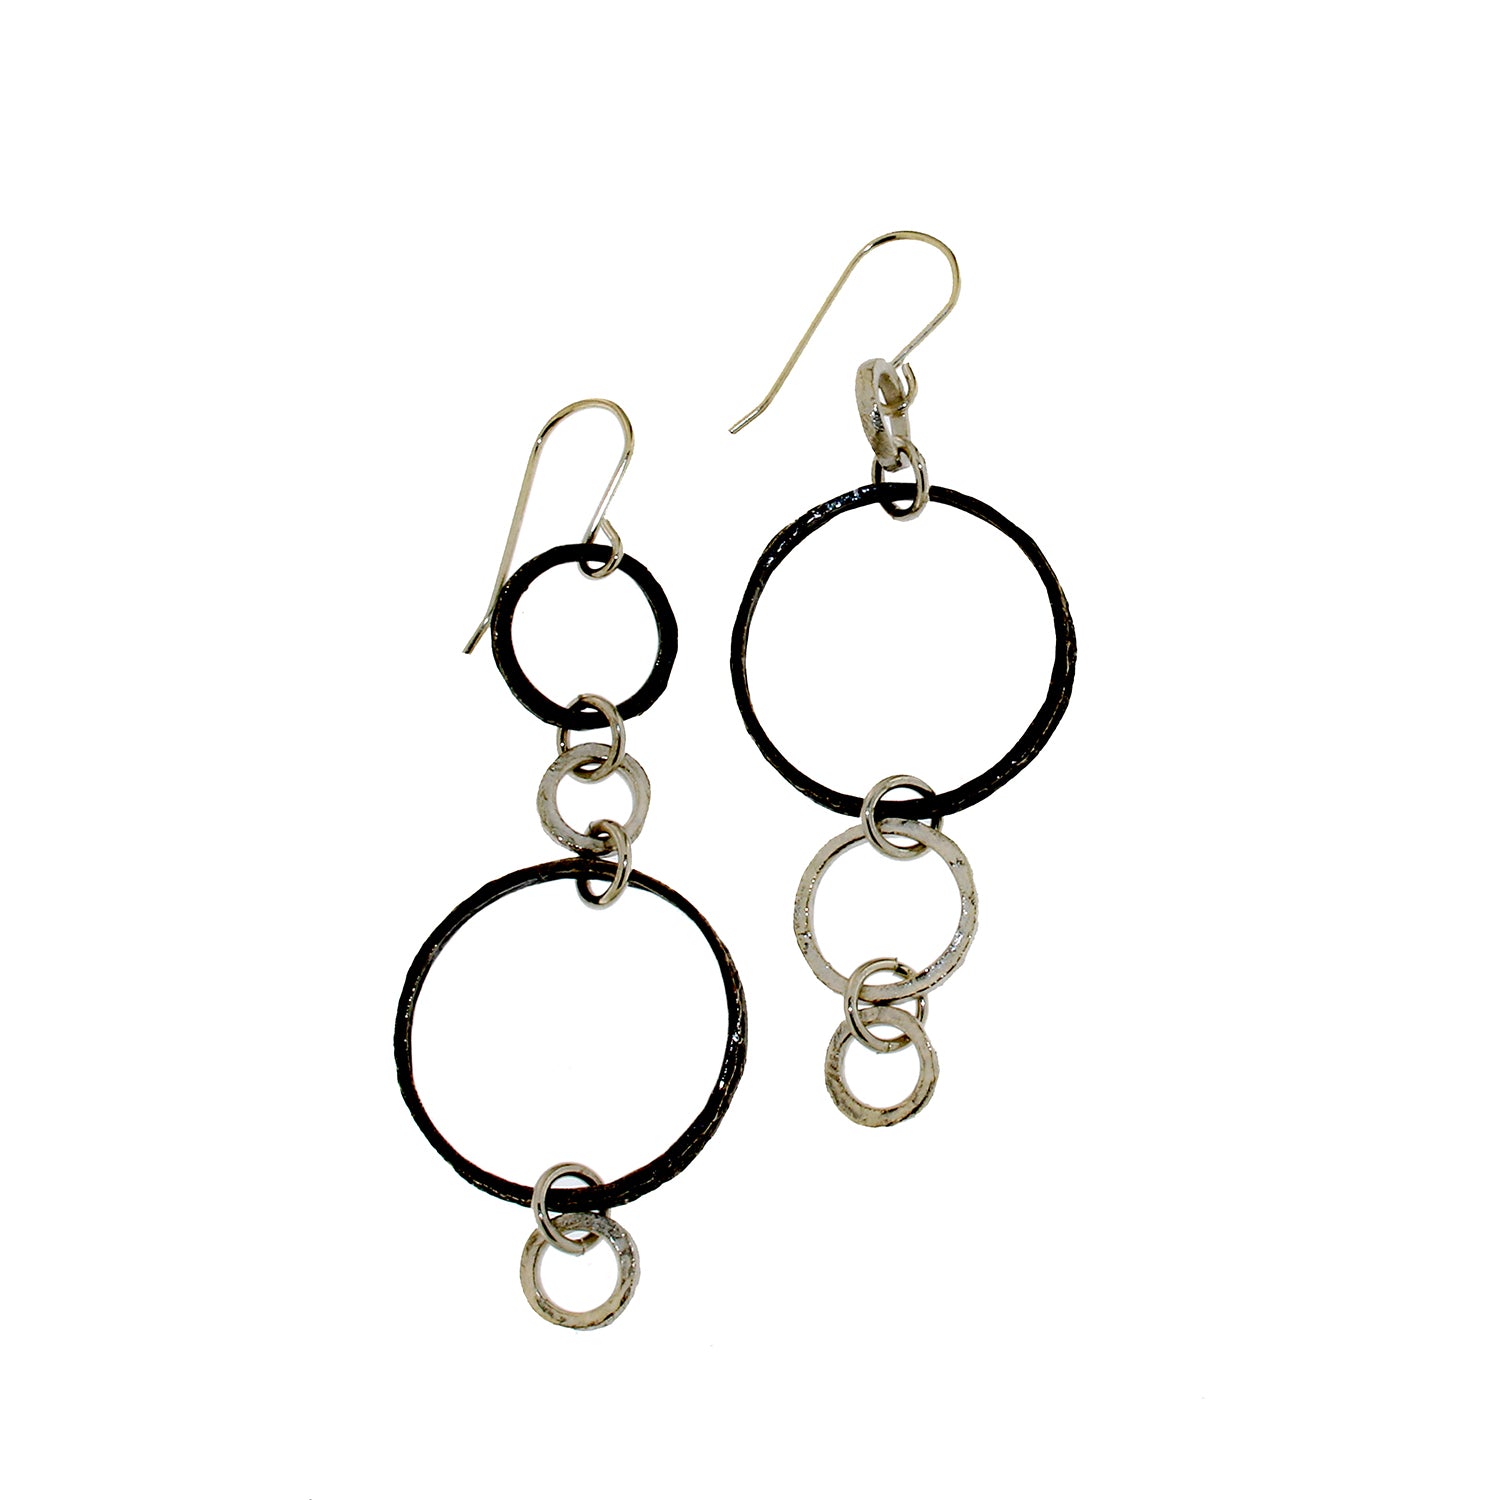 Stix and Stones Oxidized Silver Mismatched Earrings